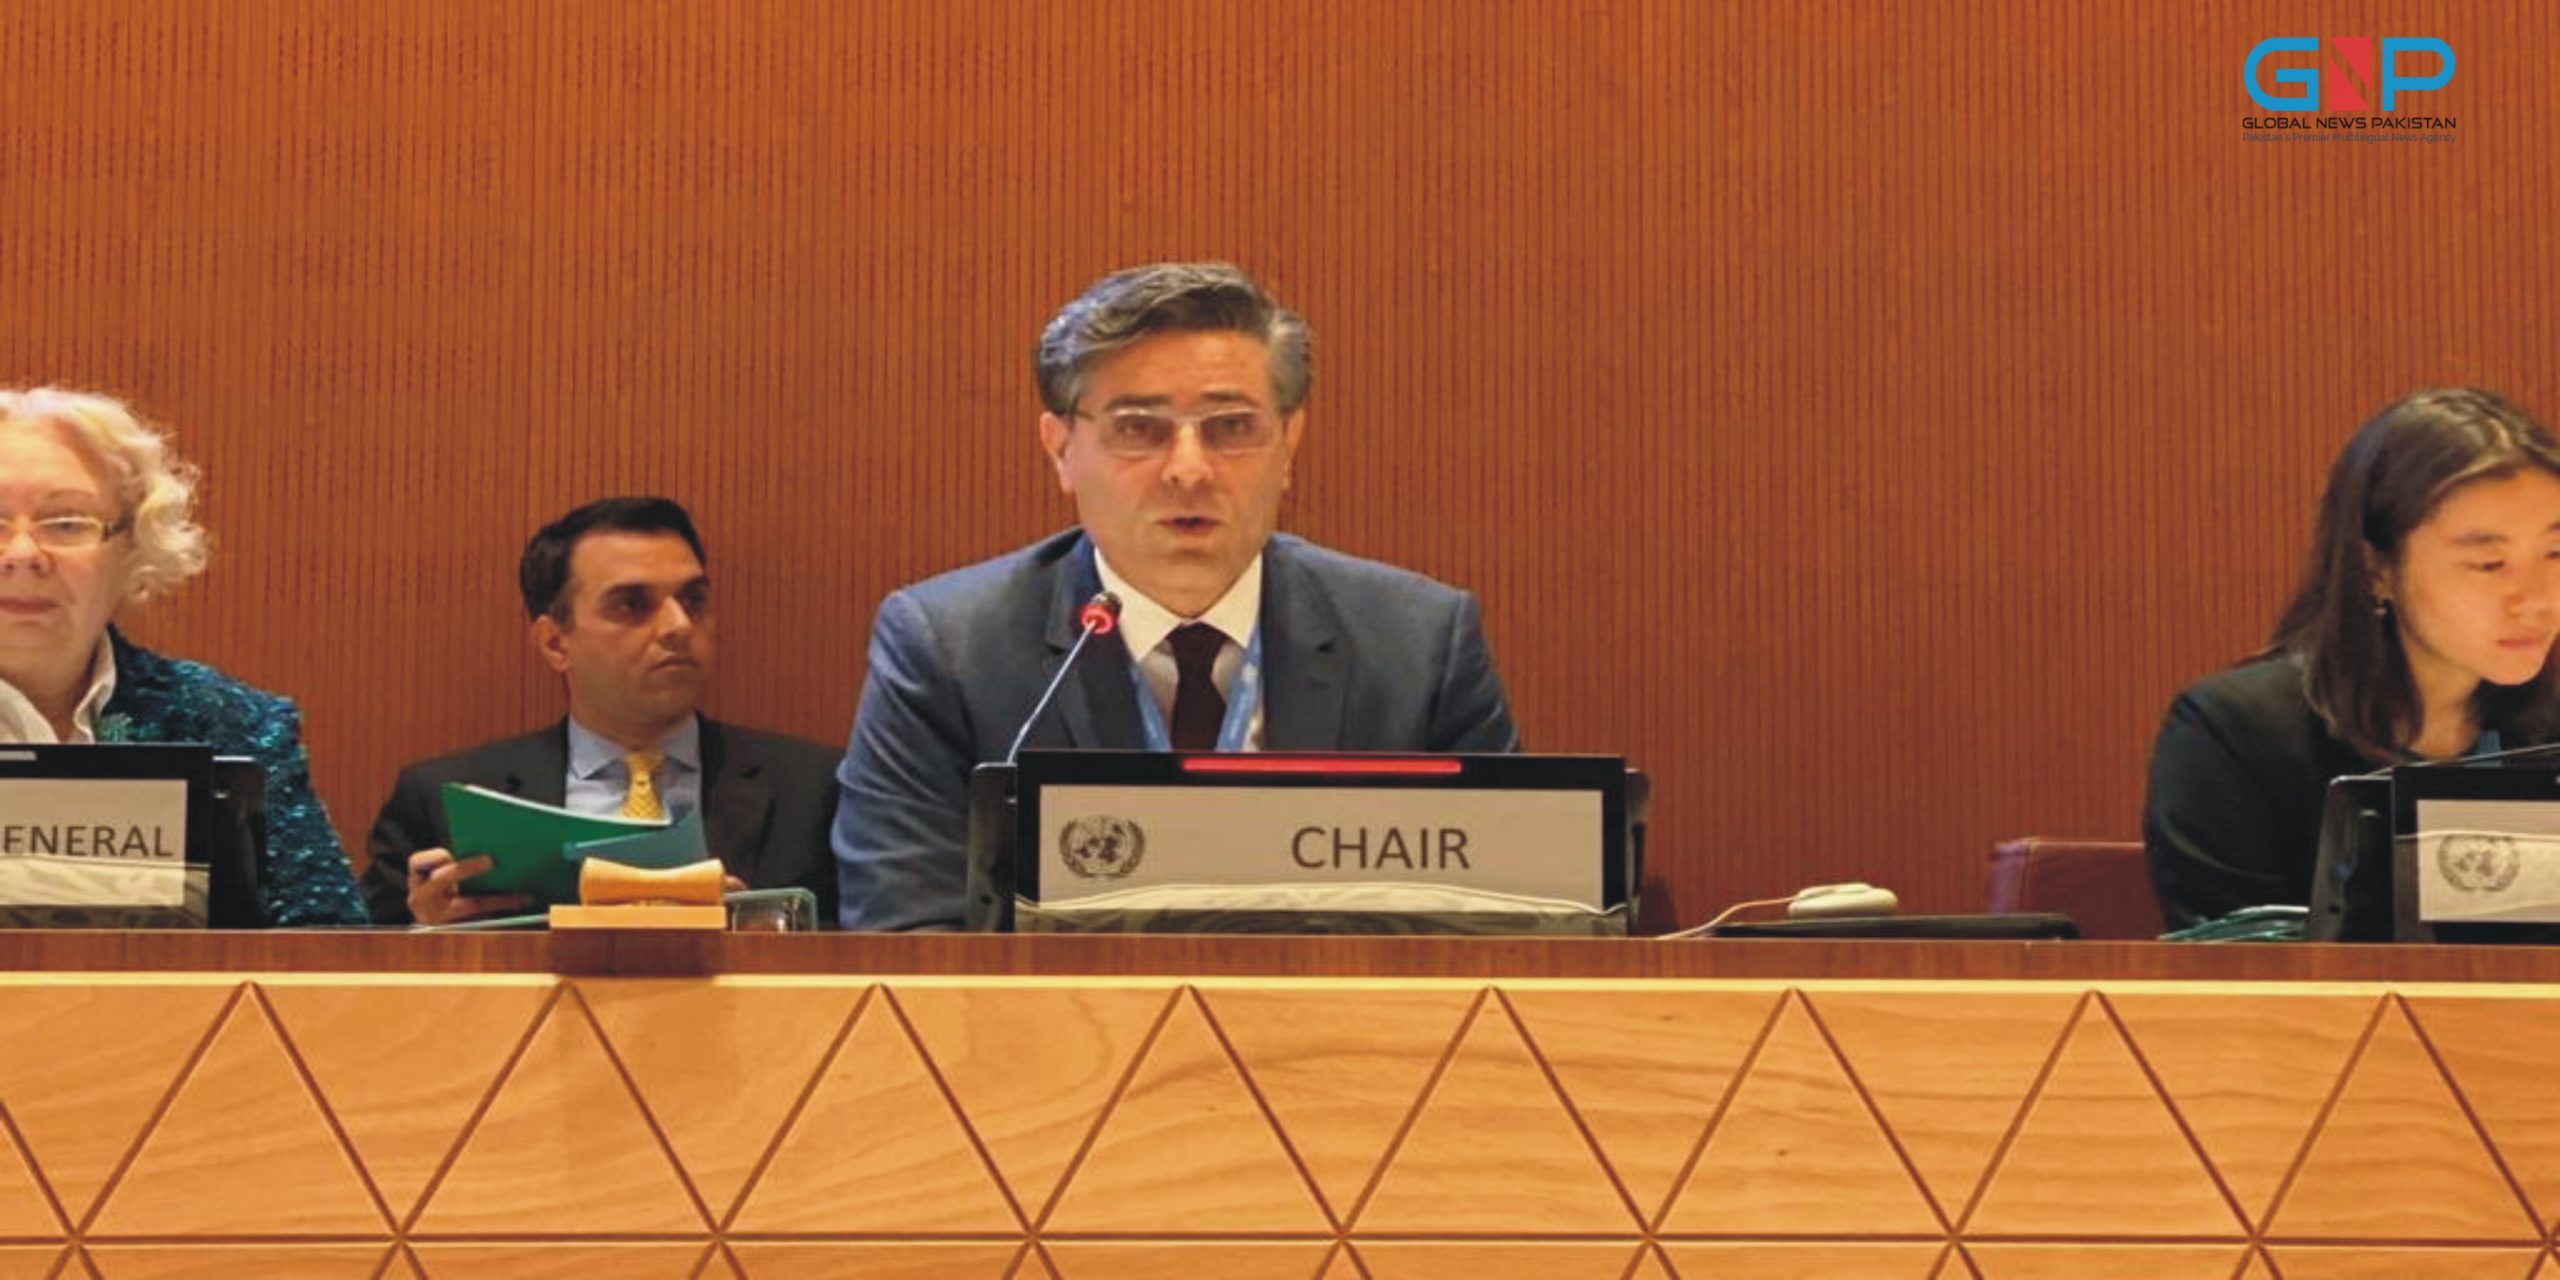 Pakistan elected as Chairperson of the Annual Meeting of the Convention on Certain Conventional Weapons CCW scaled